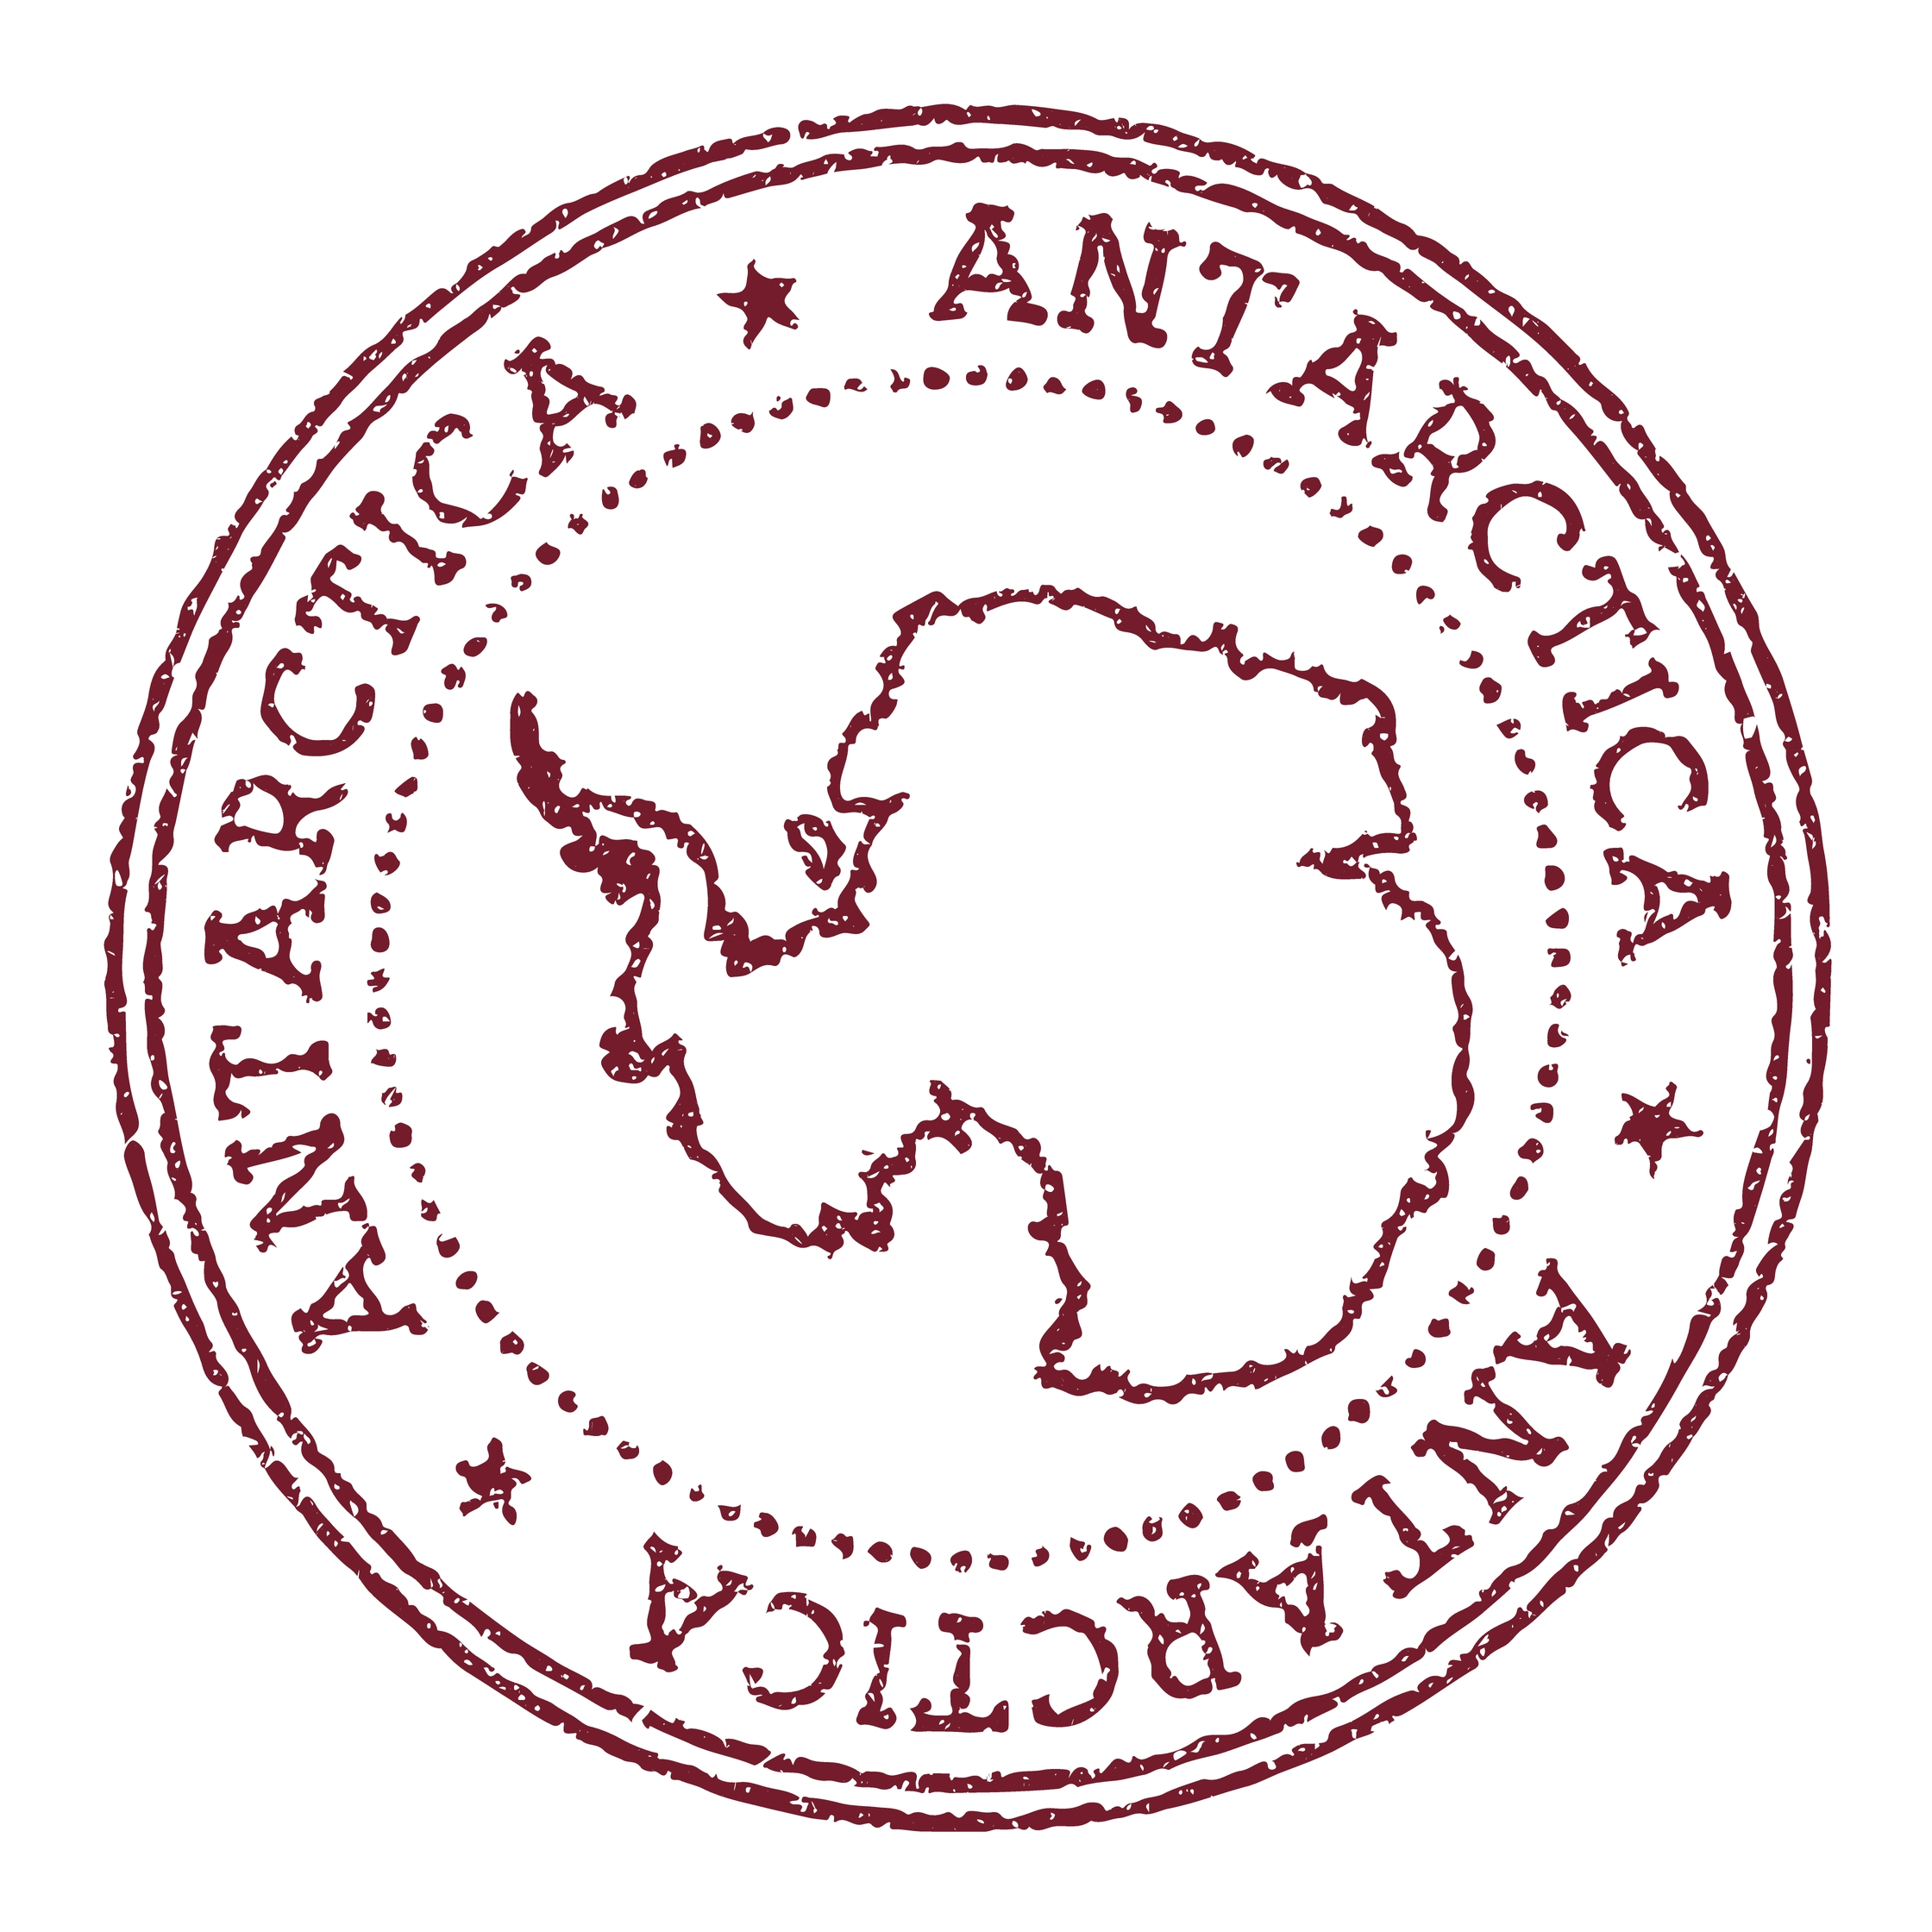 Destinations Round Rubber Postage Stamp, with an outline of the continent in the centre, and the word Antarctica written around the edge of the circle.